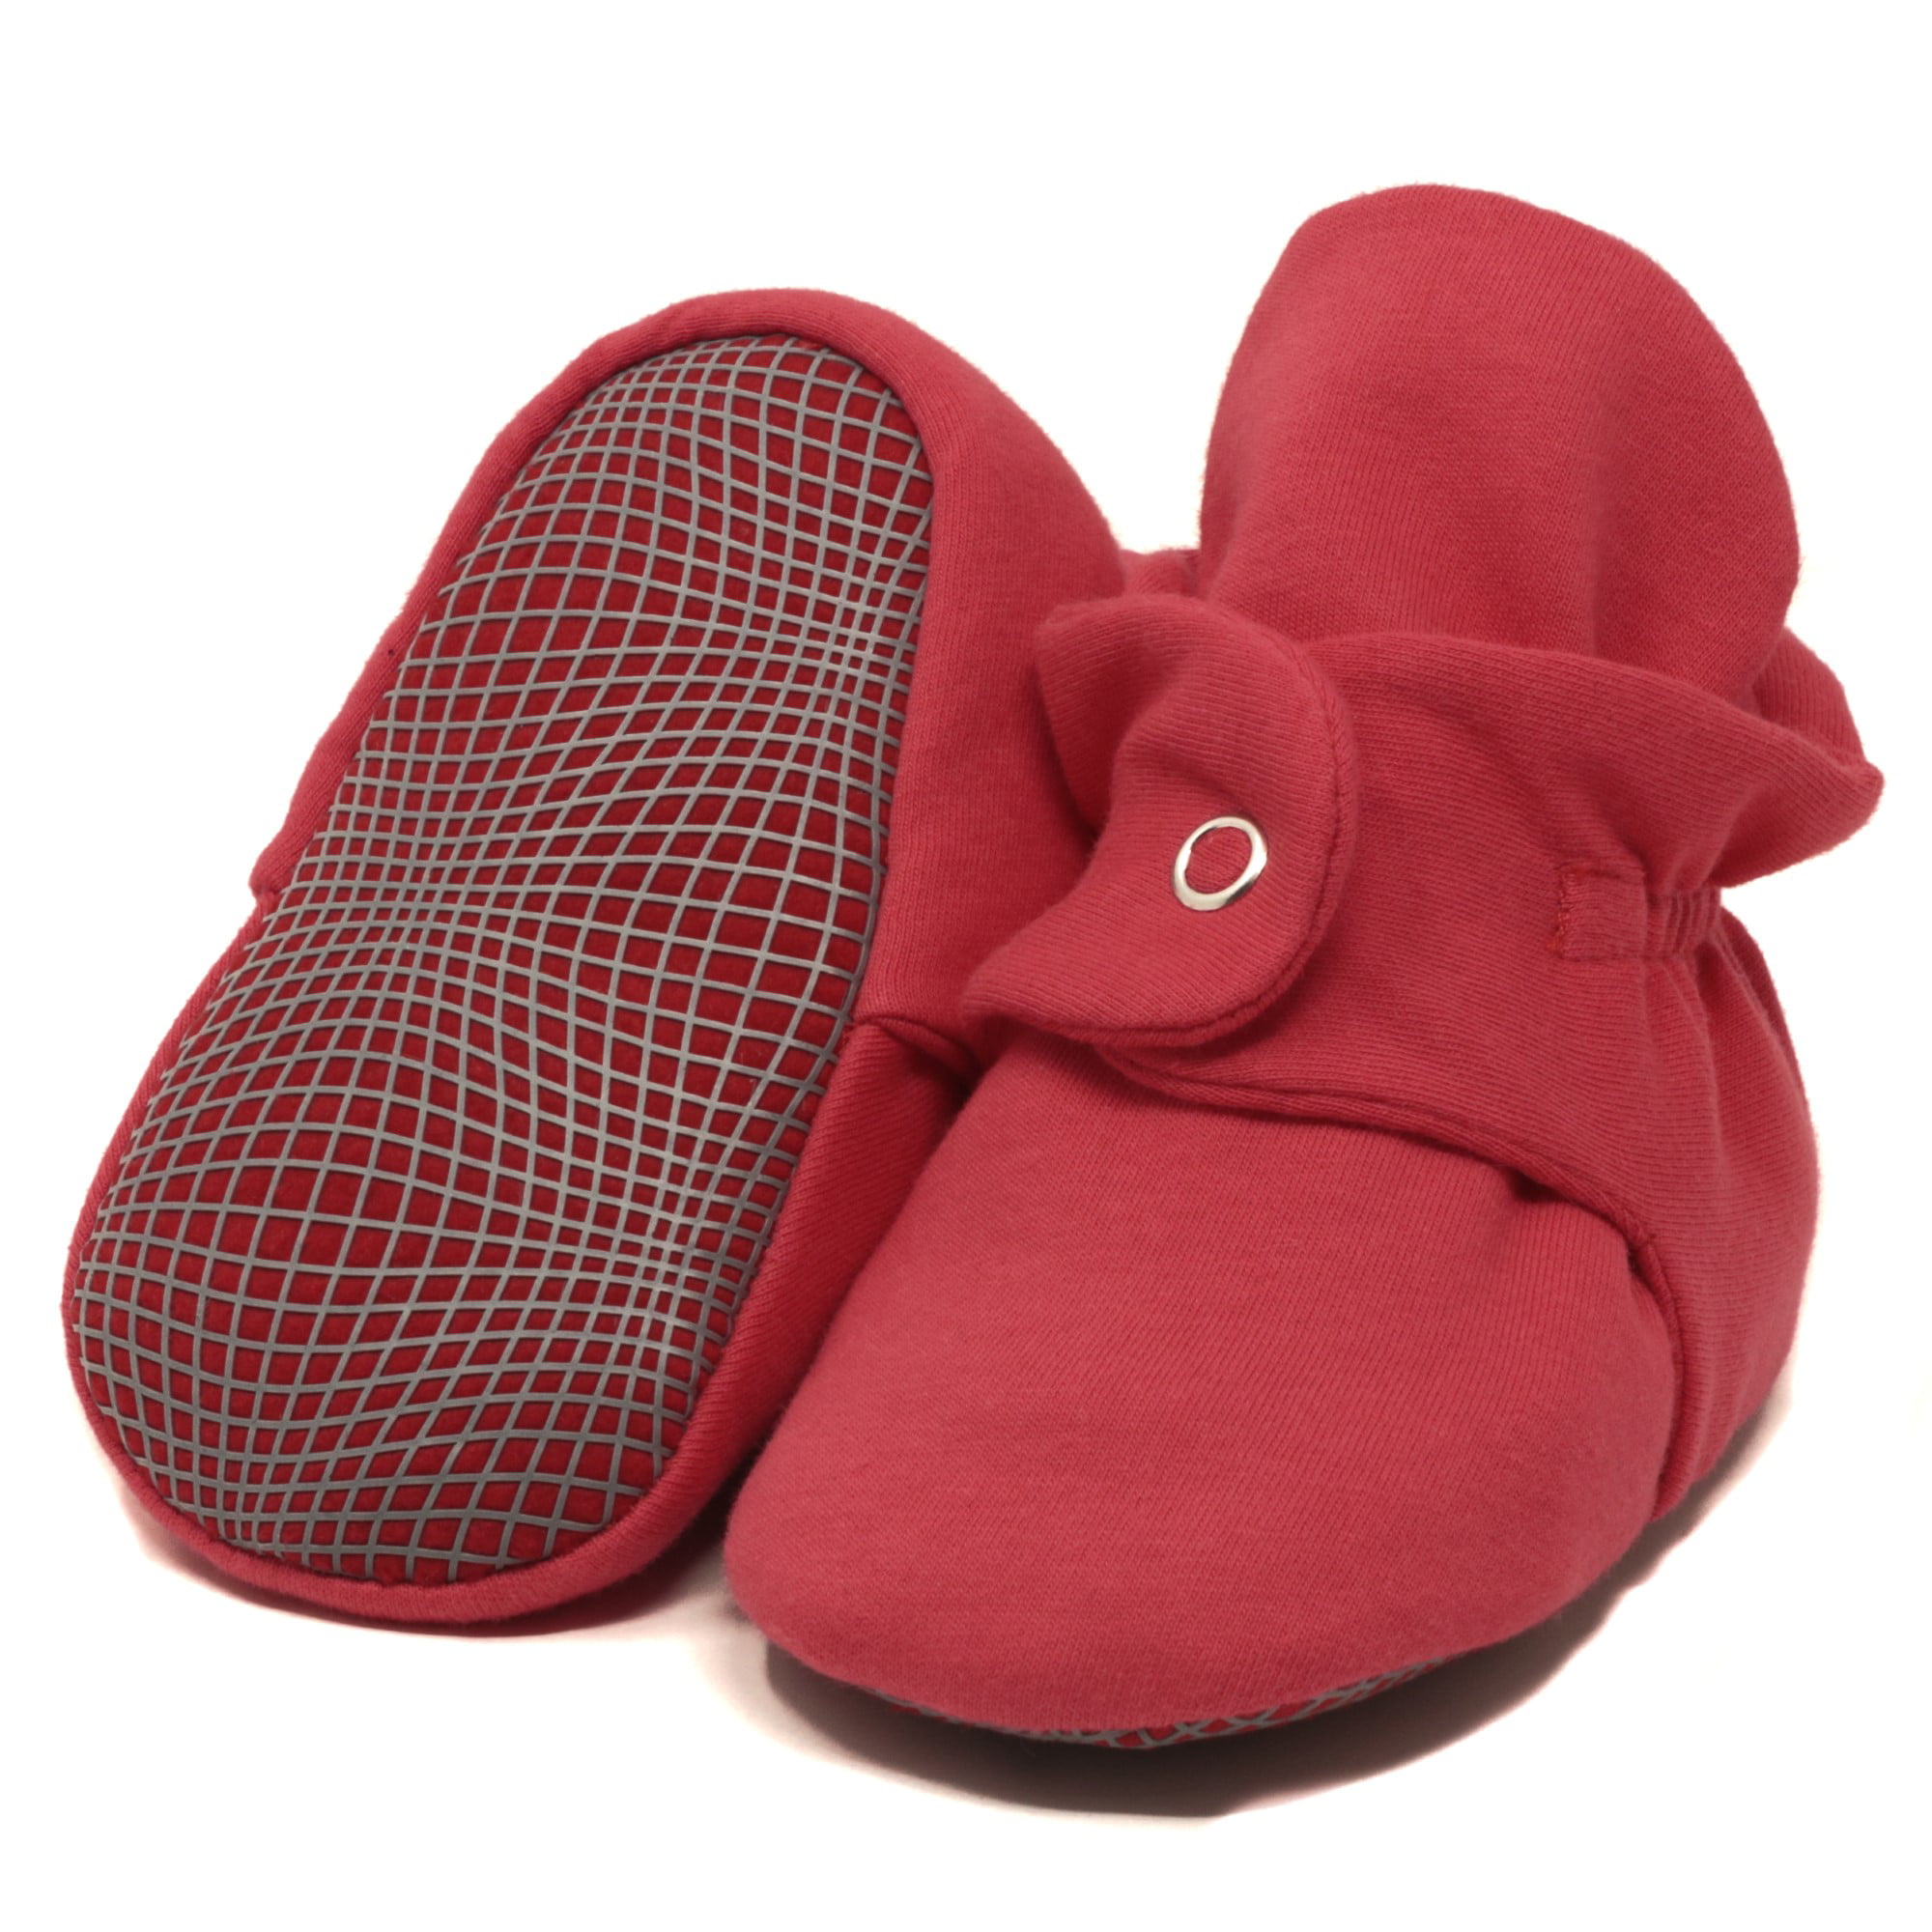 Non Skid Organic Cotton Baby Booties Stay On Baby Shoes Soft Sole House Slippers for Baby Boys Girls Toddlers